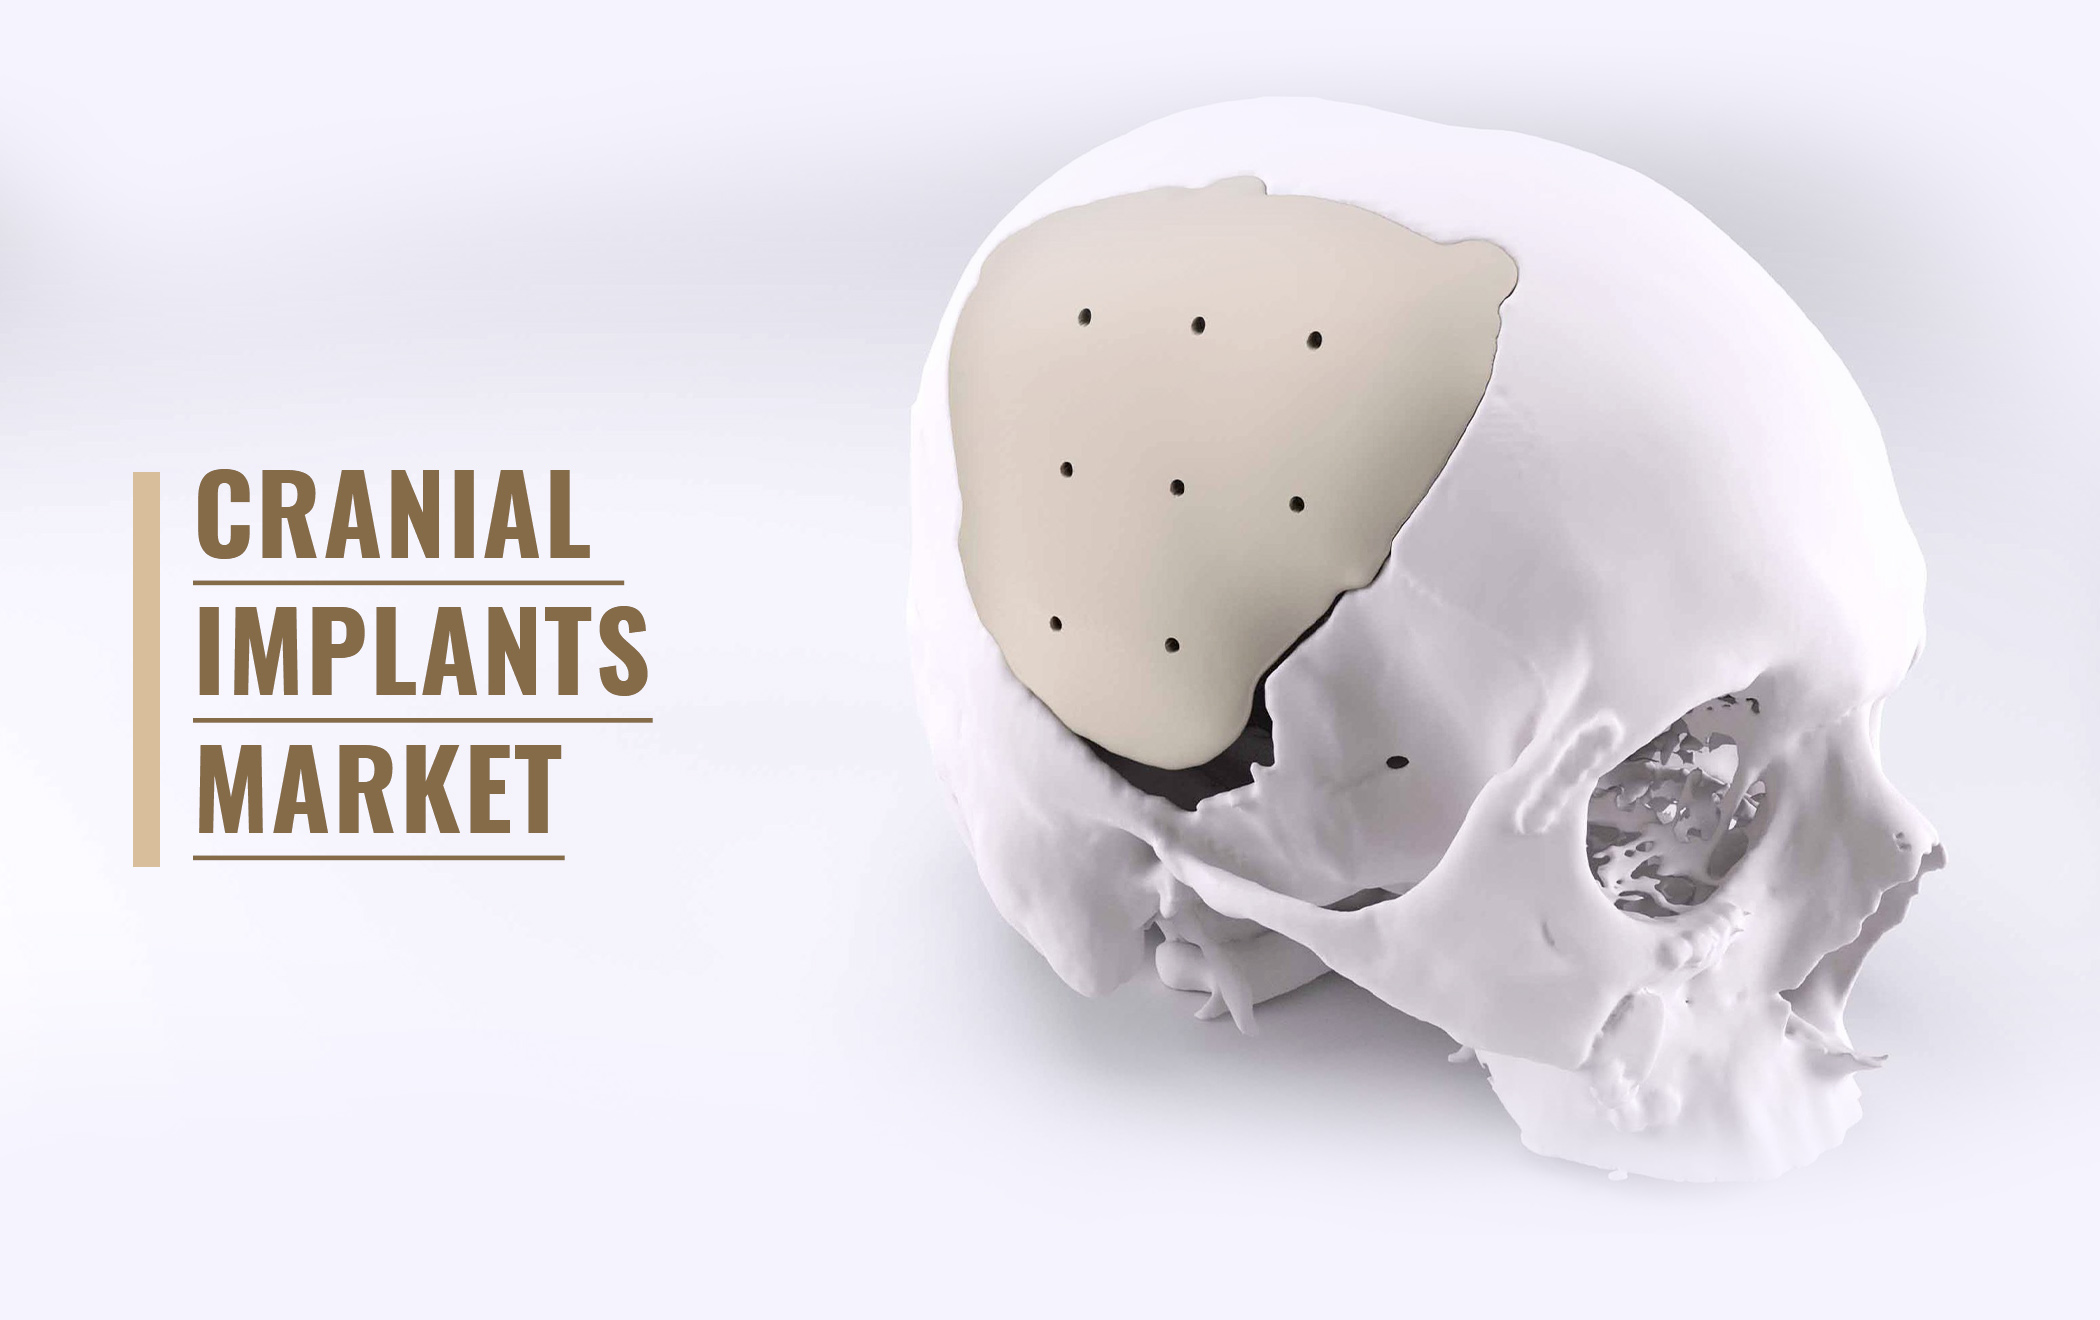 Global Cranial Implants Market is Likely to Register a CAGR of 6.2% Between 2019 to 2030